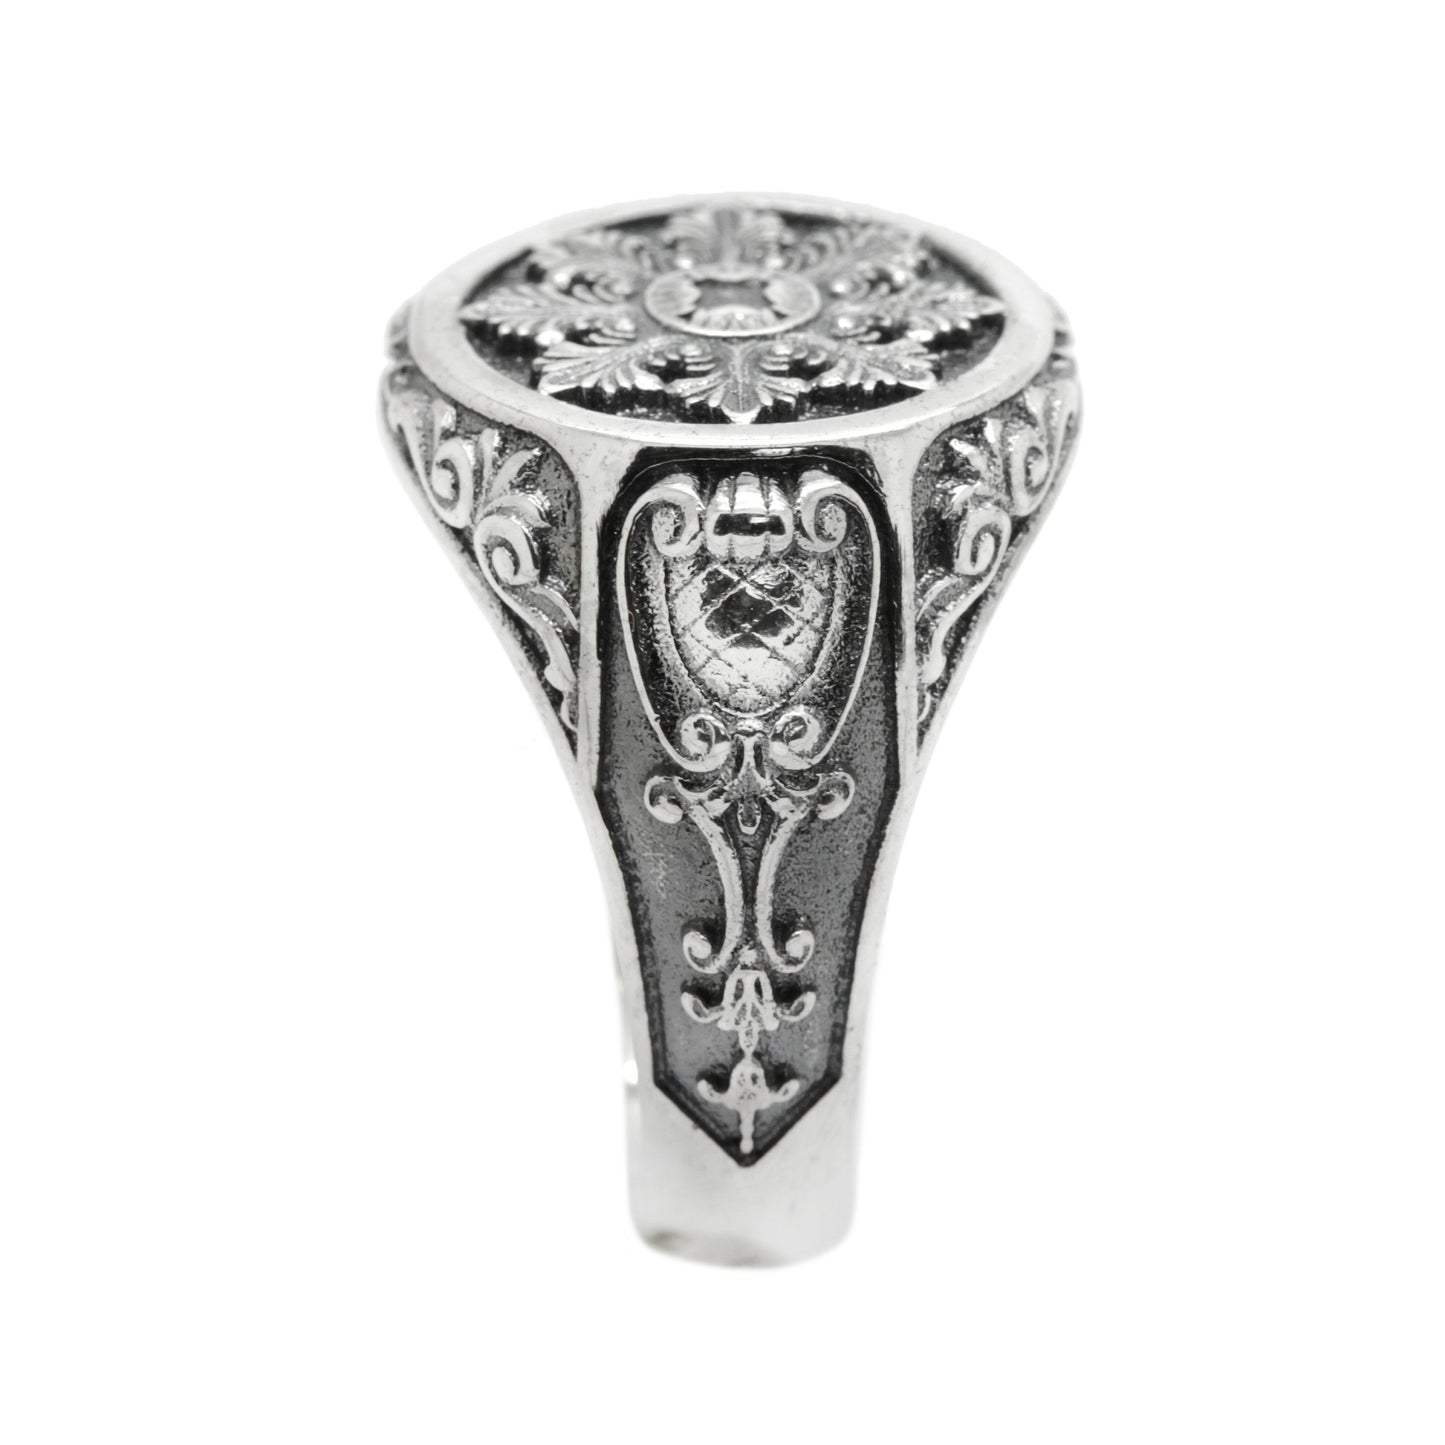 Barocco Baroque Old-fashion Style Patterns Mens Signet Silver Ring